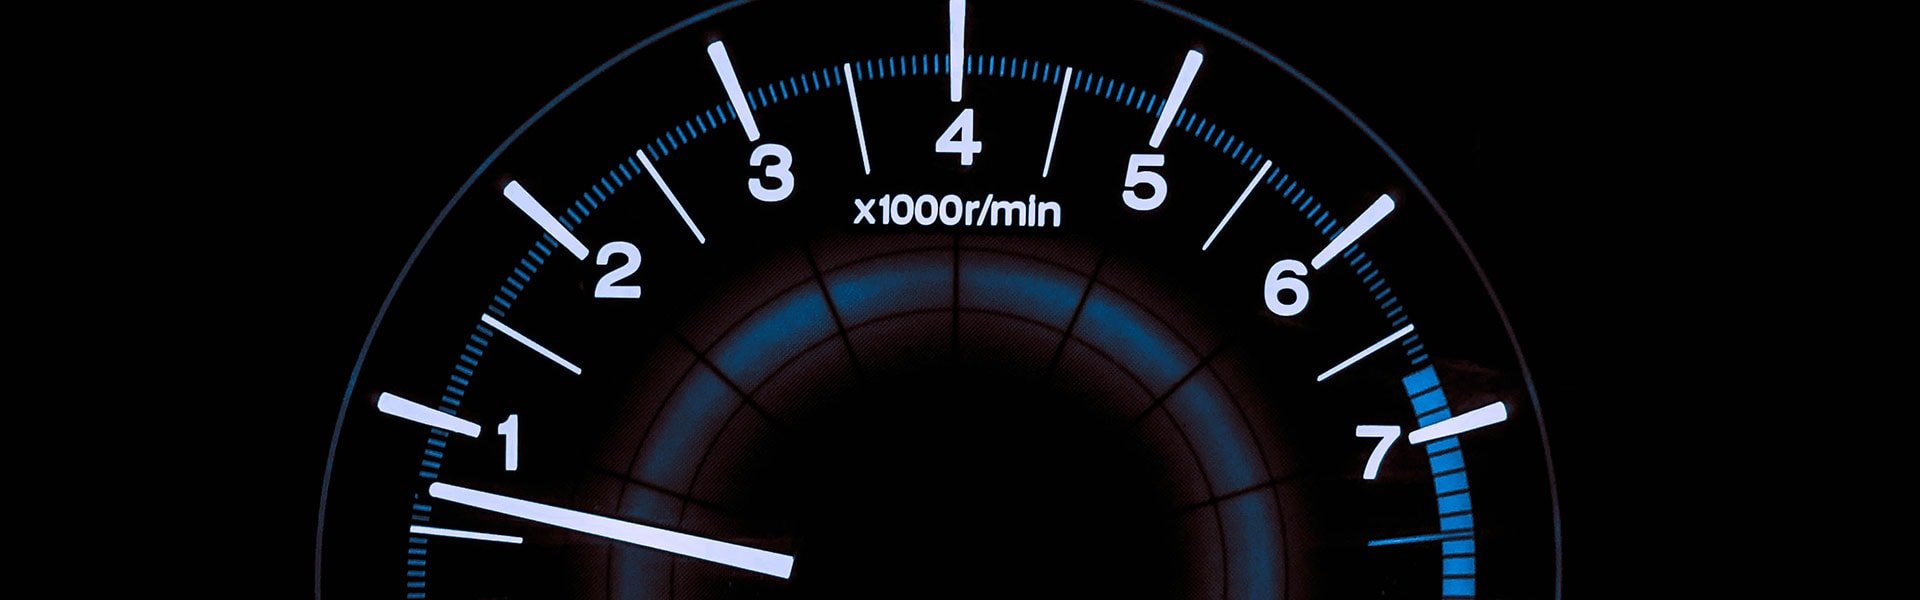 5 Ways to Improve the Speed of Your Website